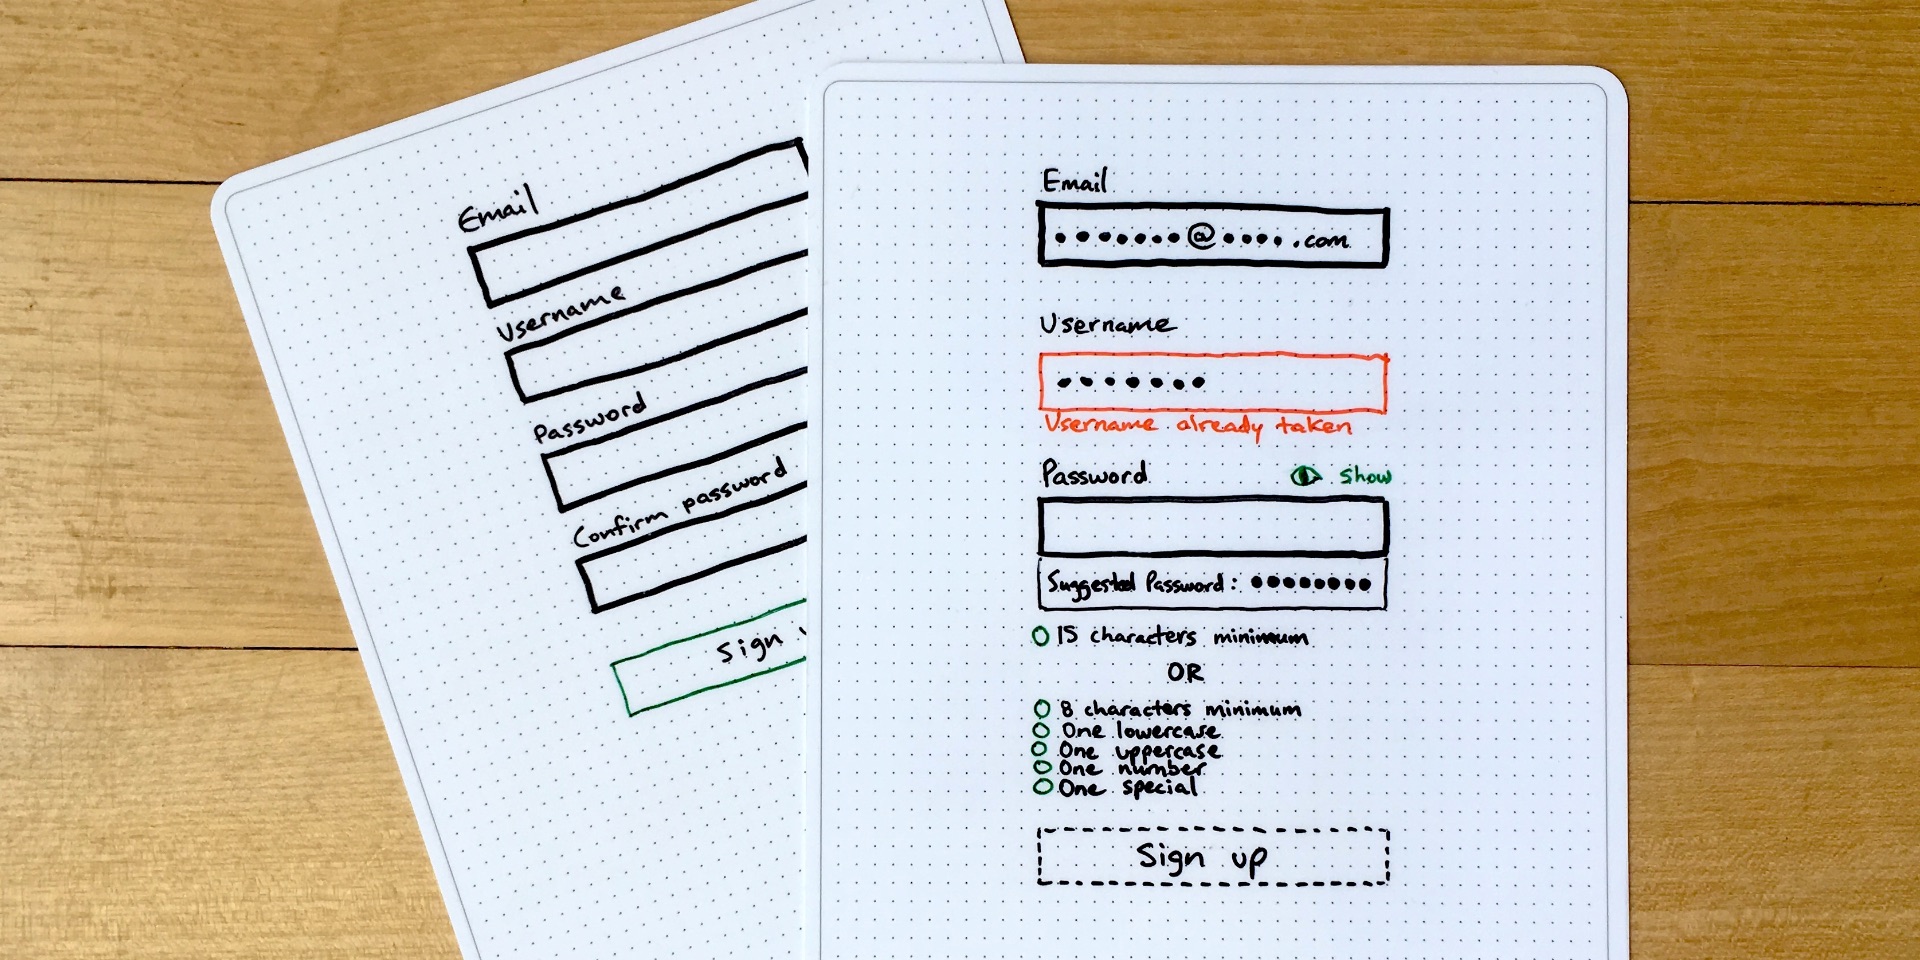 Wireframe of a sign up form